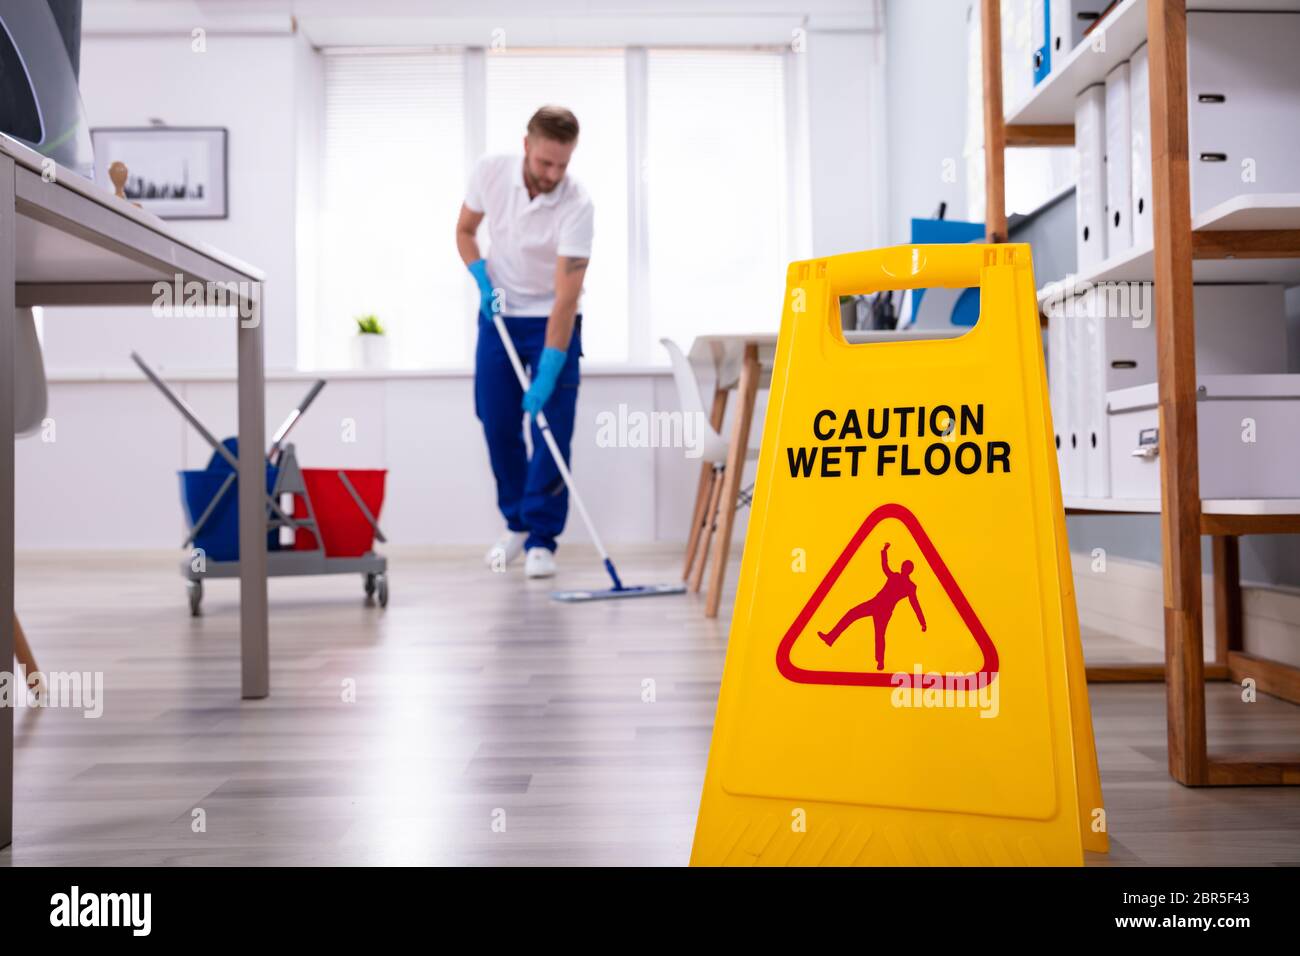 Male janitor with mop cleaning modern office floor Stock Photo